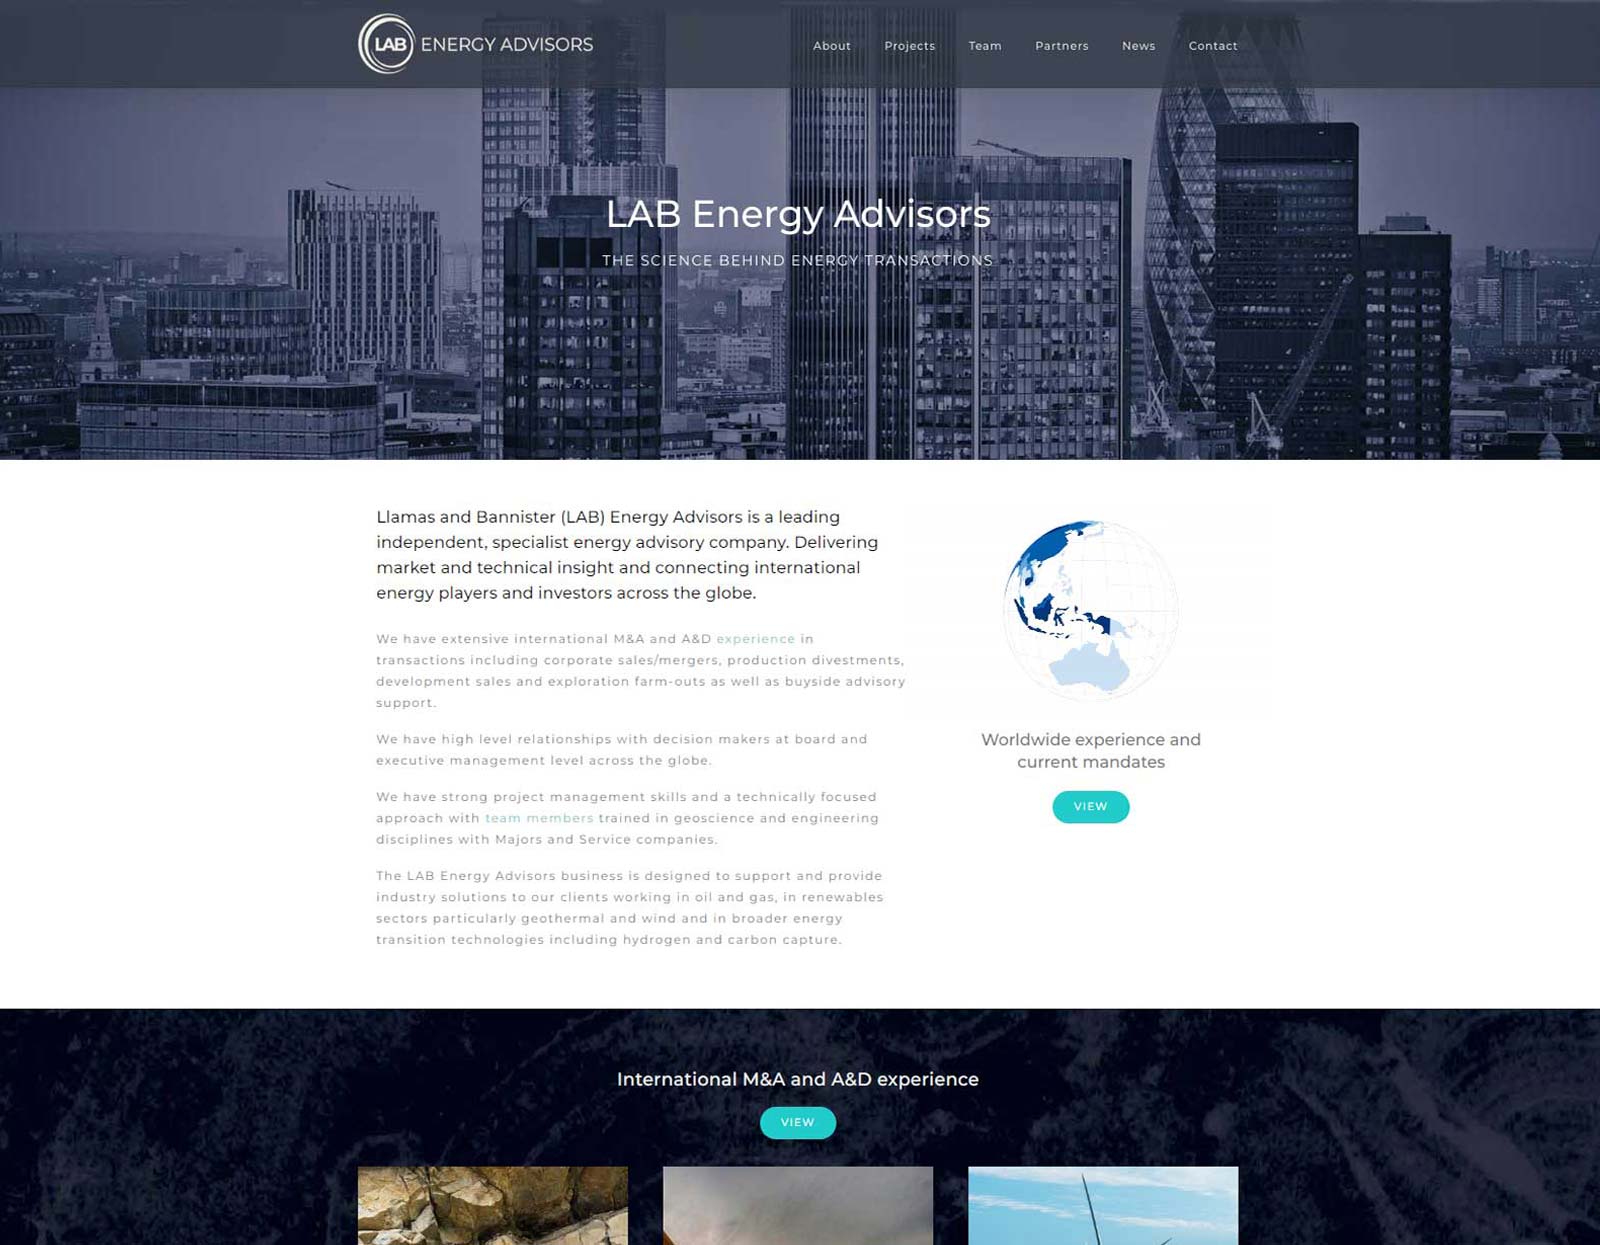 Image of web design for LAB Energy Advisors, showing the website home page.